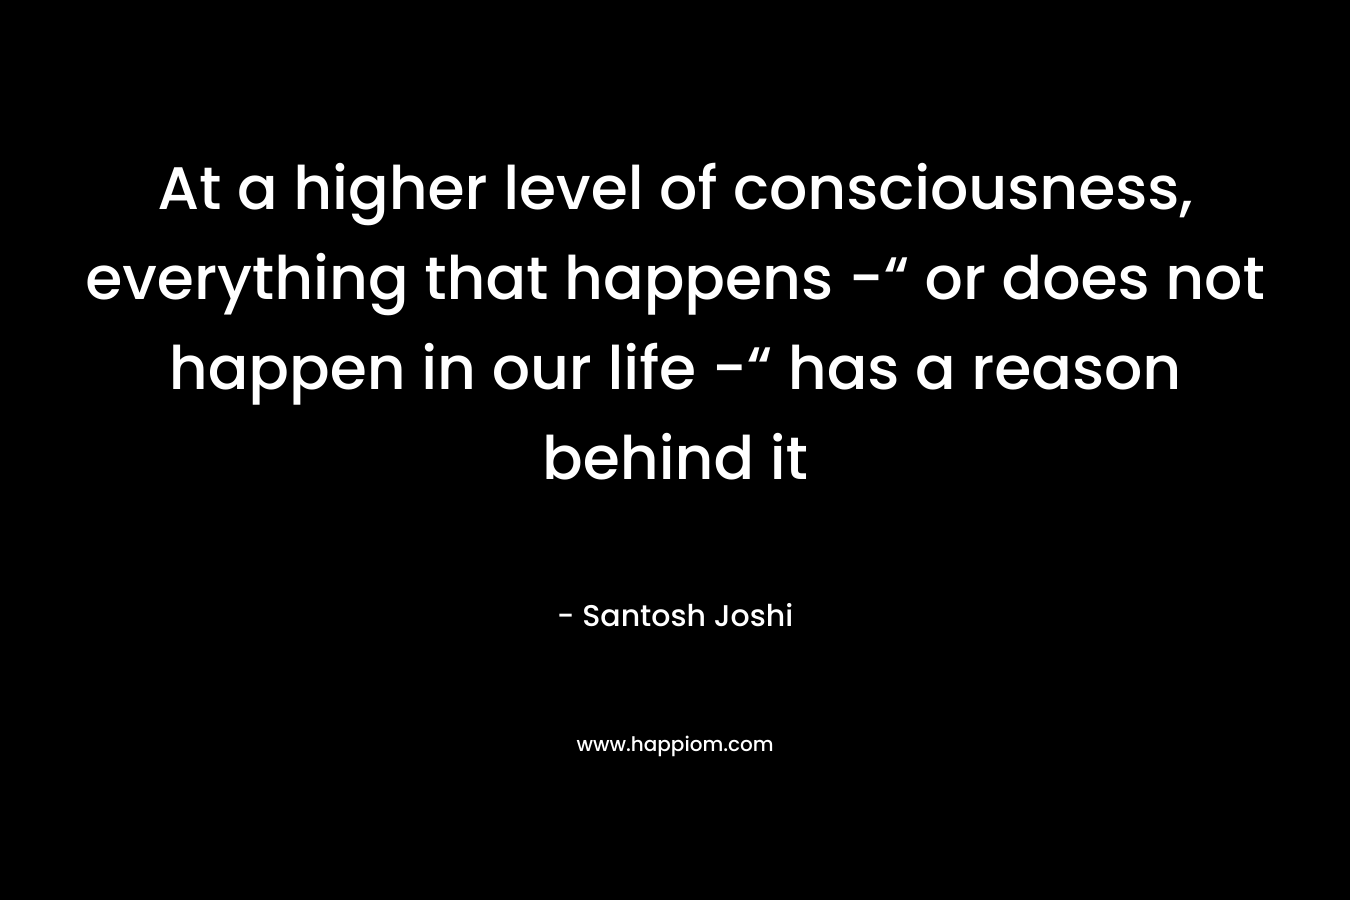 At a higher level of consciousness, everything that happens -“ or does not happen in our life -“ has a reason behind it